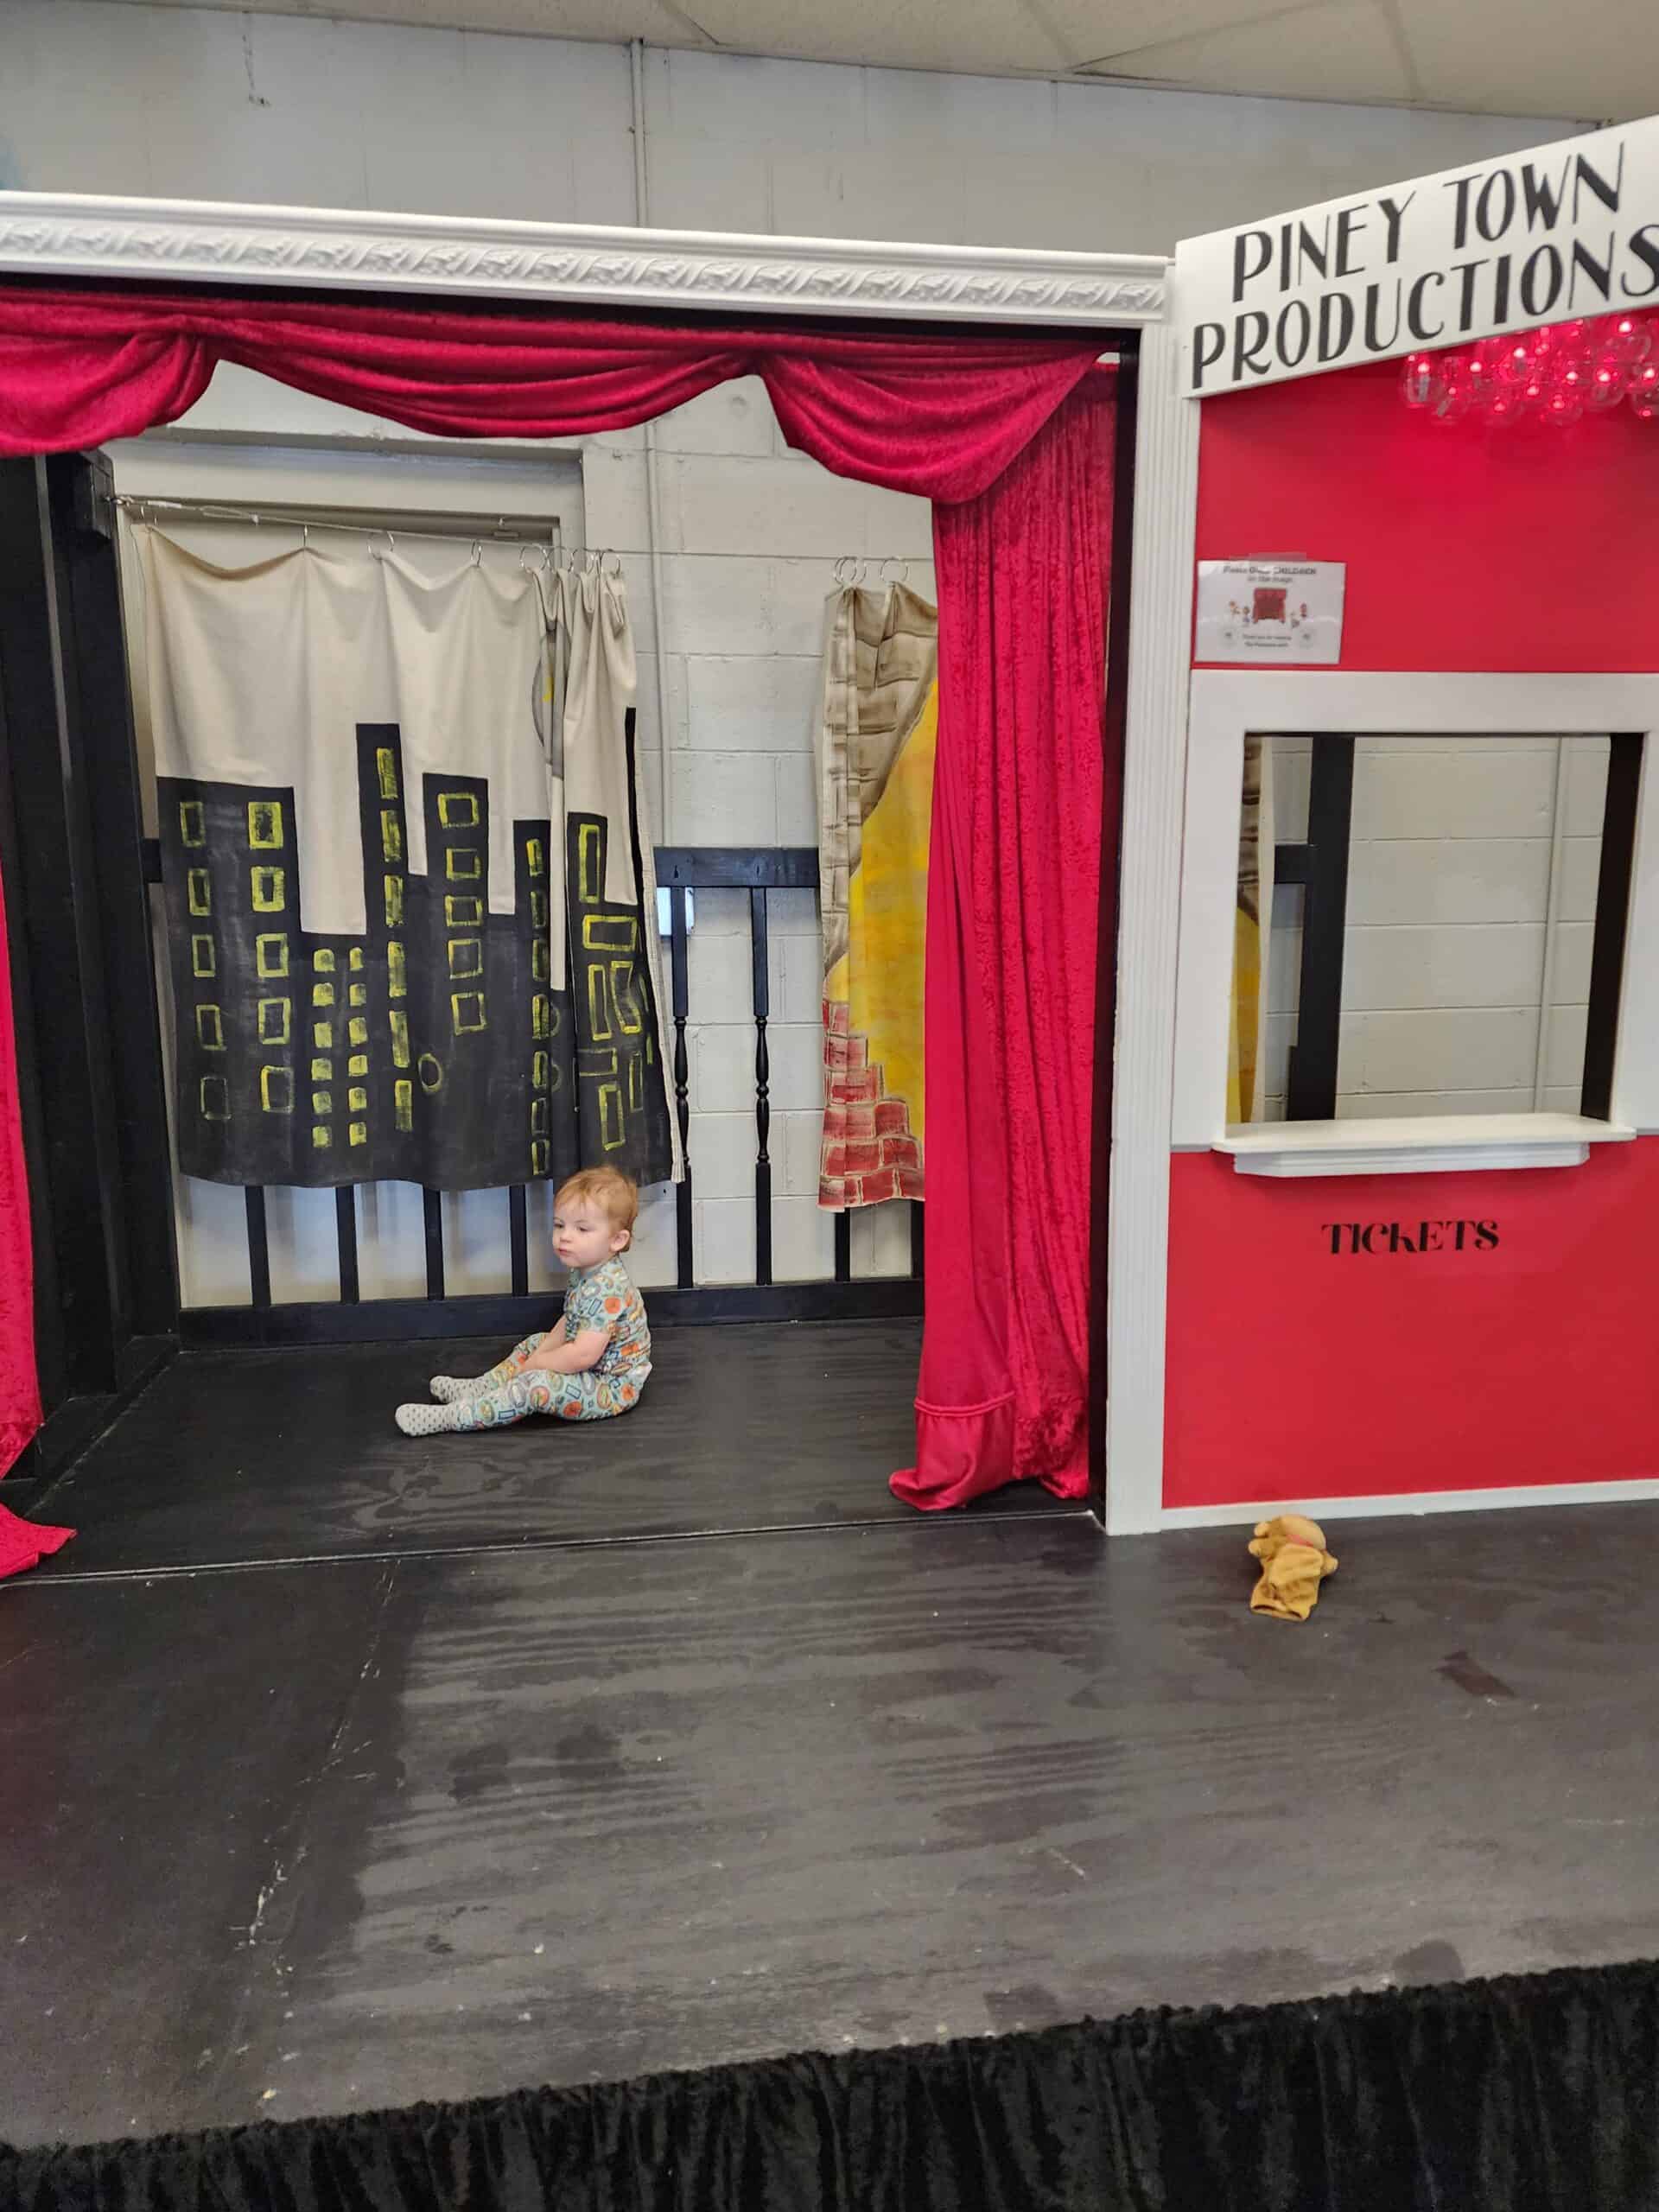 A child sits on stage under the bright lights of Piney Town Productions at the Piney Town Playhouse in Fuquay-Varina, NC, next to a ticket booth with red drapes, creating a mini theatrical experience for budding performers.